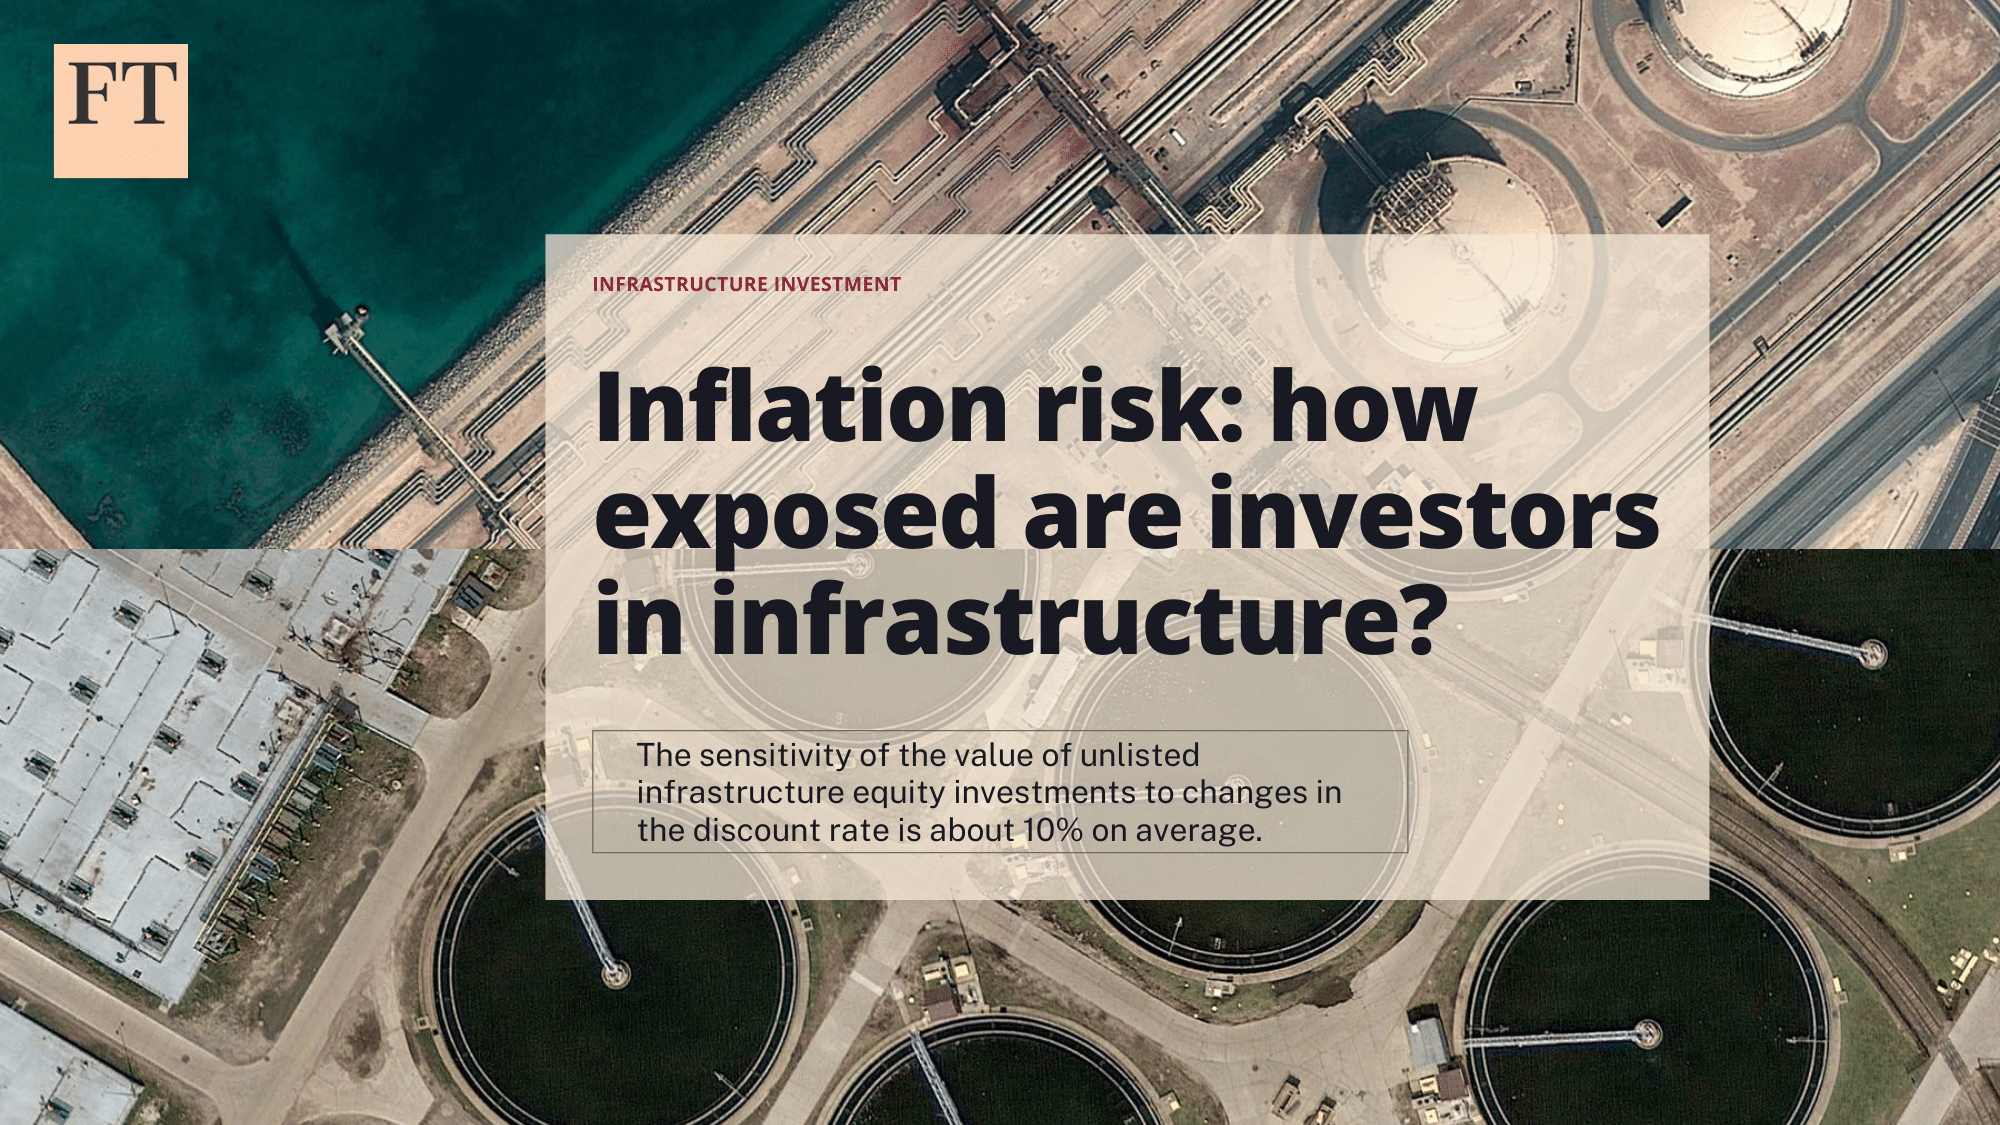 FT: How exposed are infrastructure investors to inflation risk